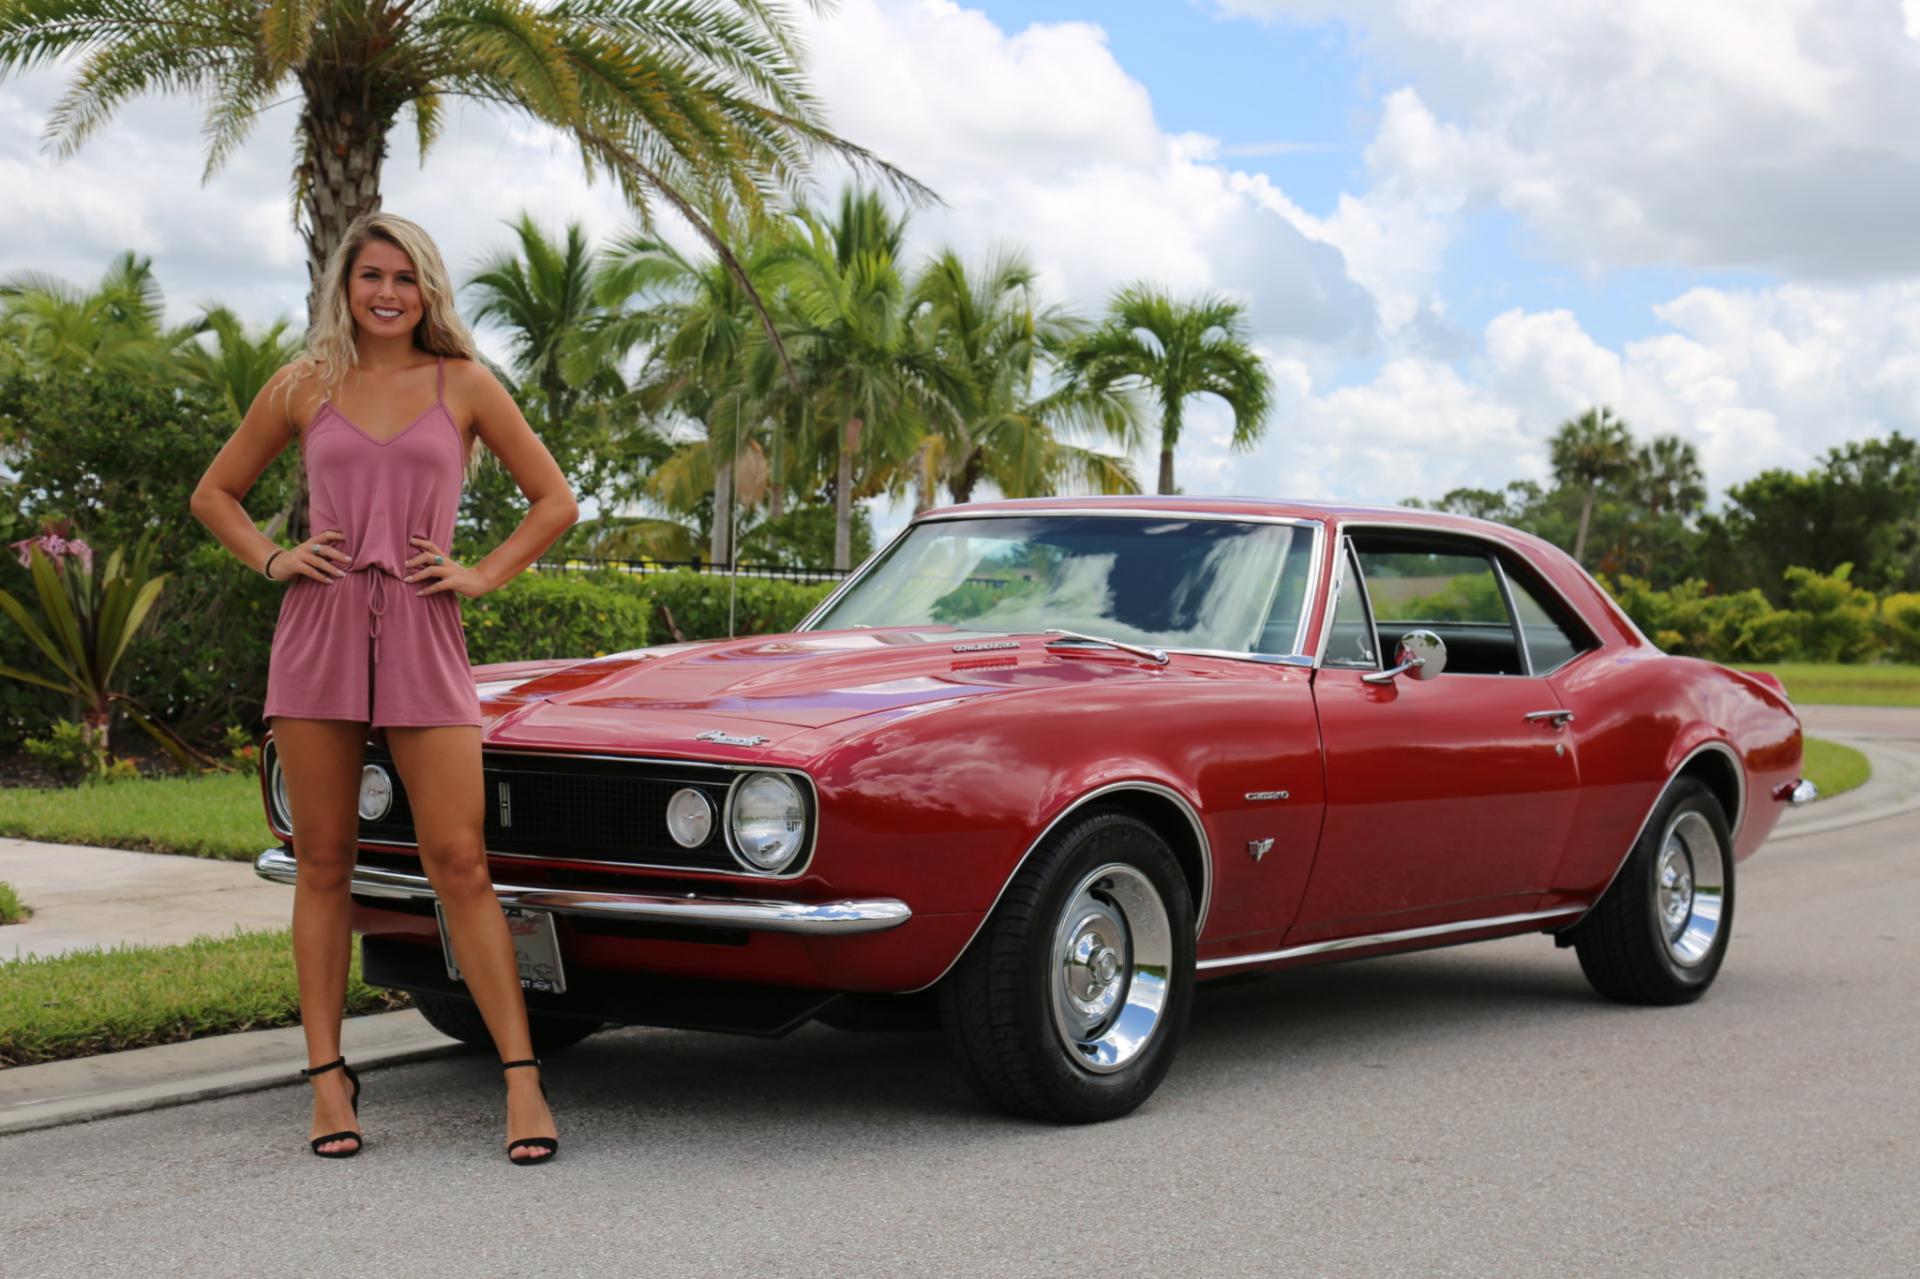 Used 1967 Chevrolet Camaro For Sale ($29,900) | Muscle Cars for Sale Inc.  Stock #1961